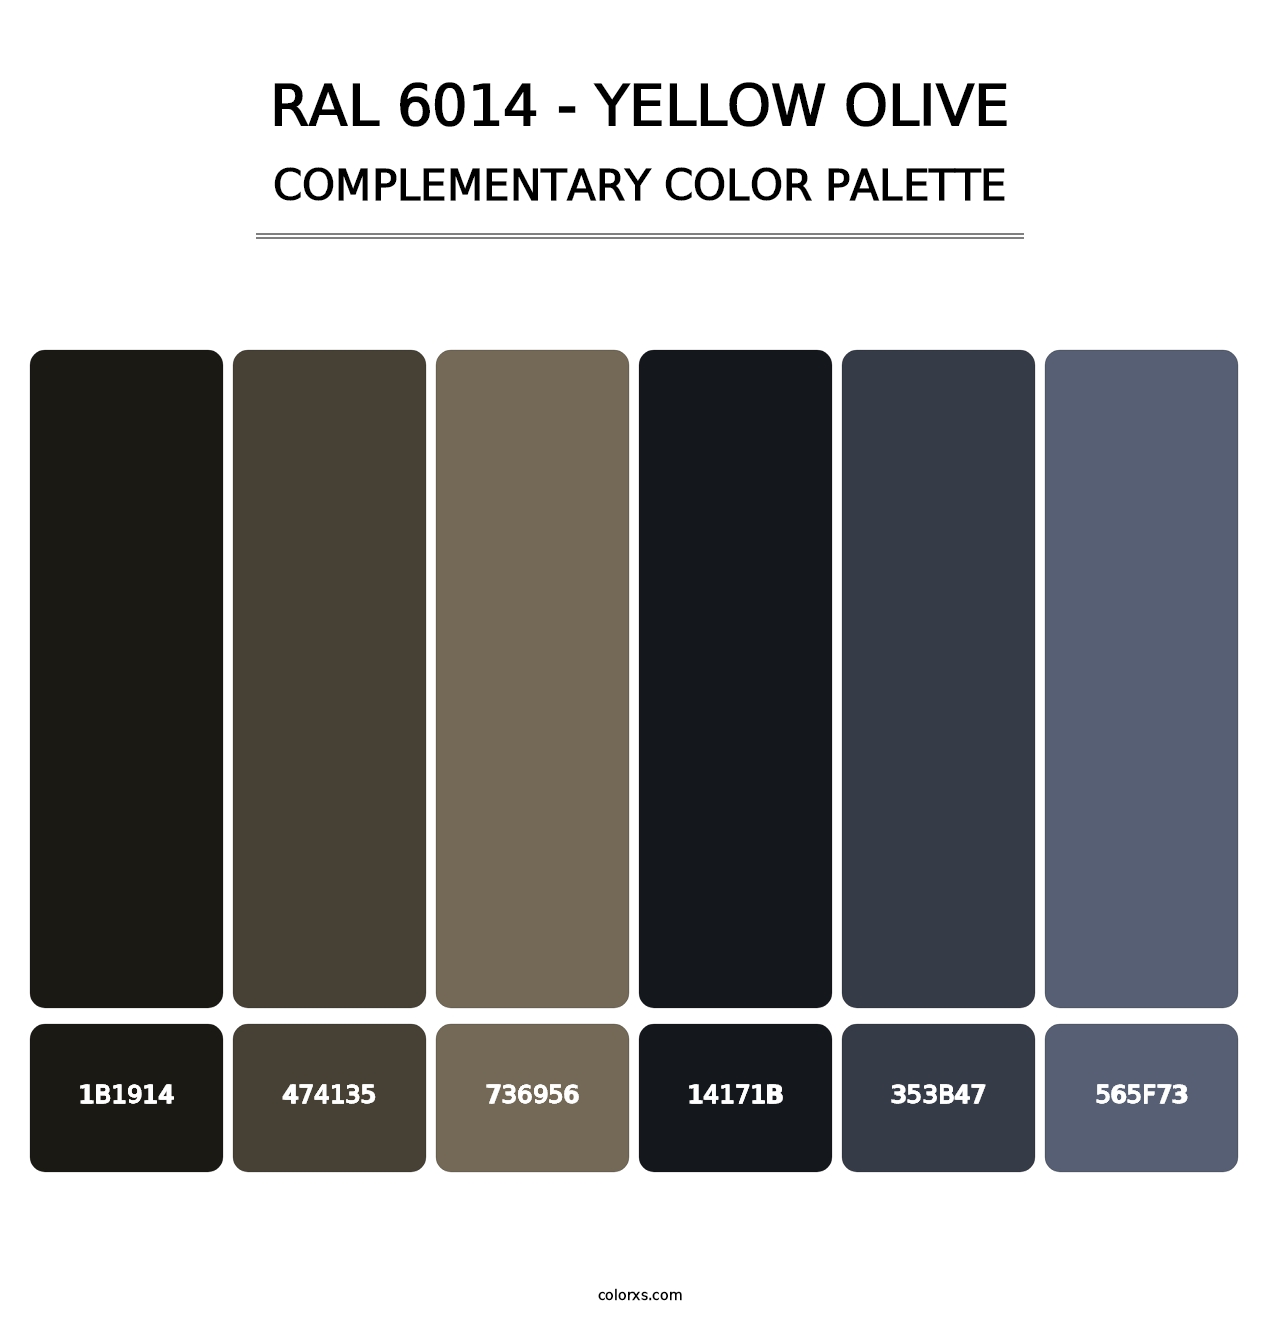 RAL 6014 - Yellow Olive - Complementary Color Palette